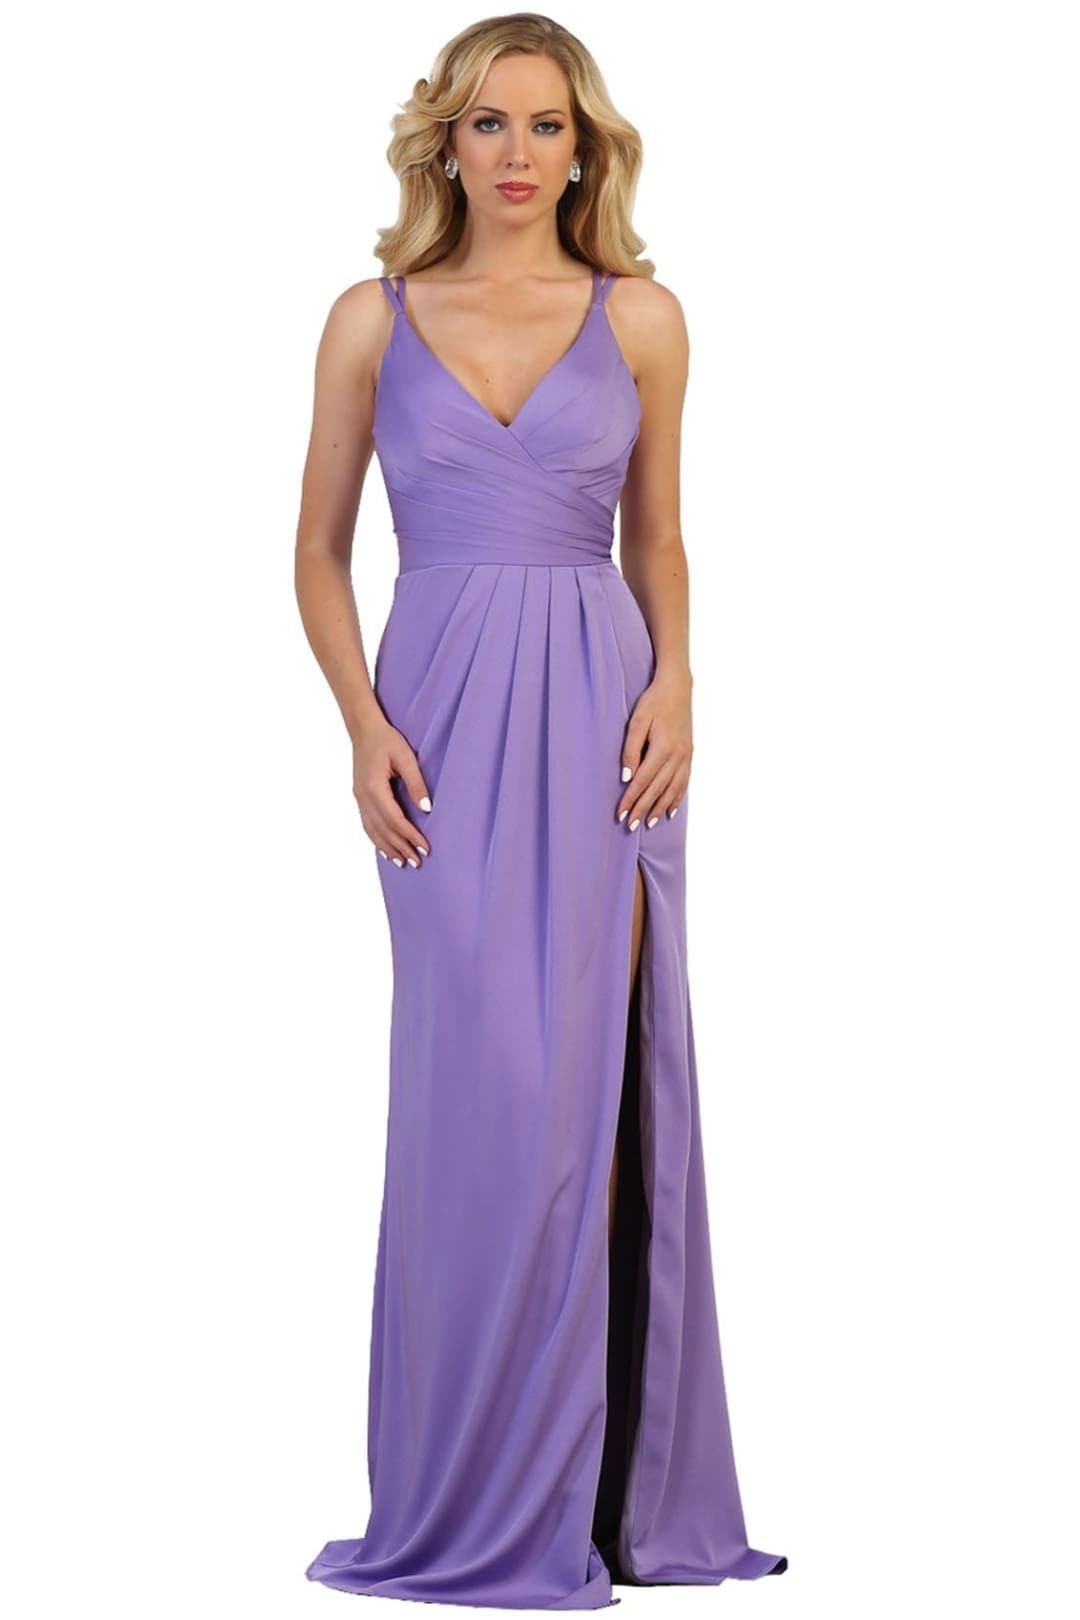 Long Sexy Pageant Gown - Lavender / 4